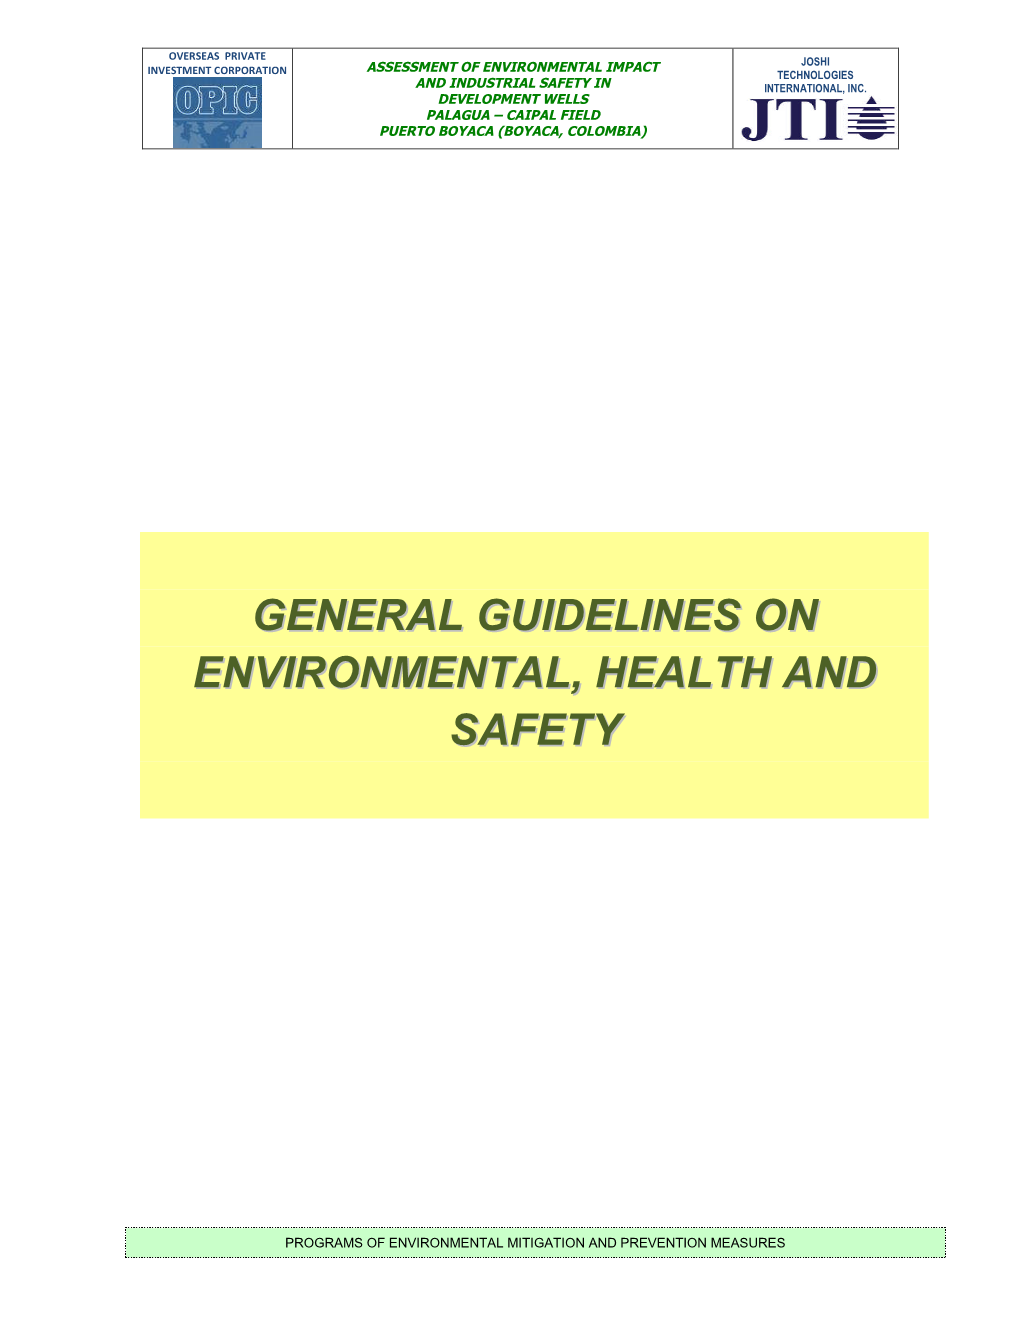 General Guidelines on Enviromental, Health and Safety